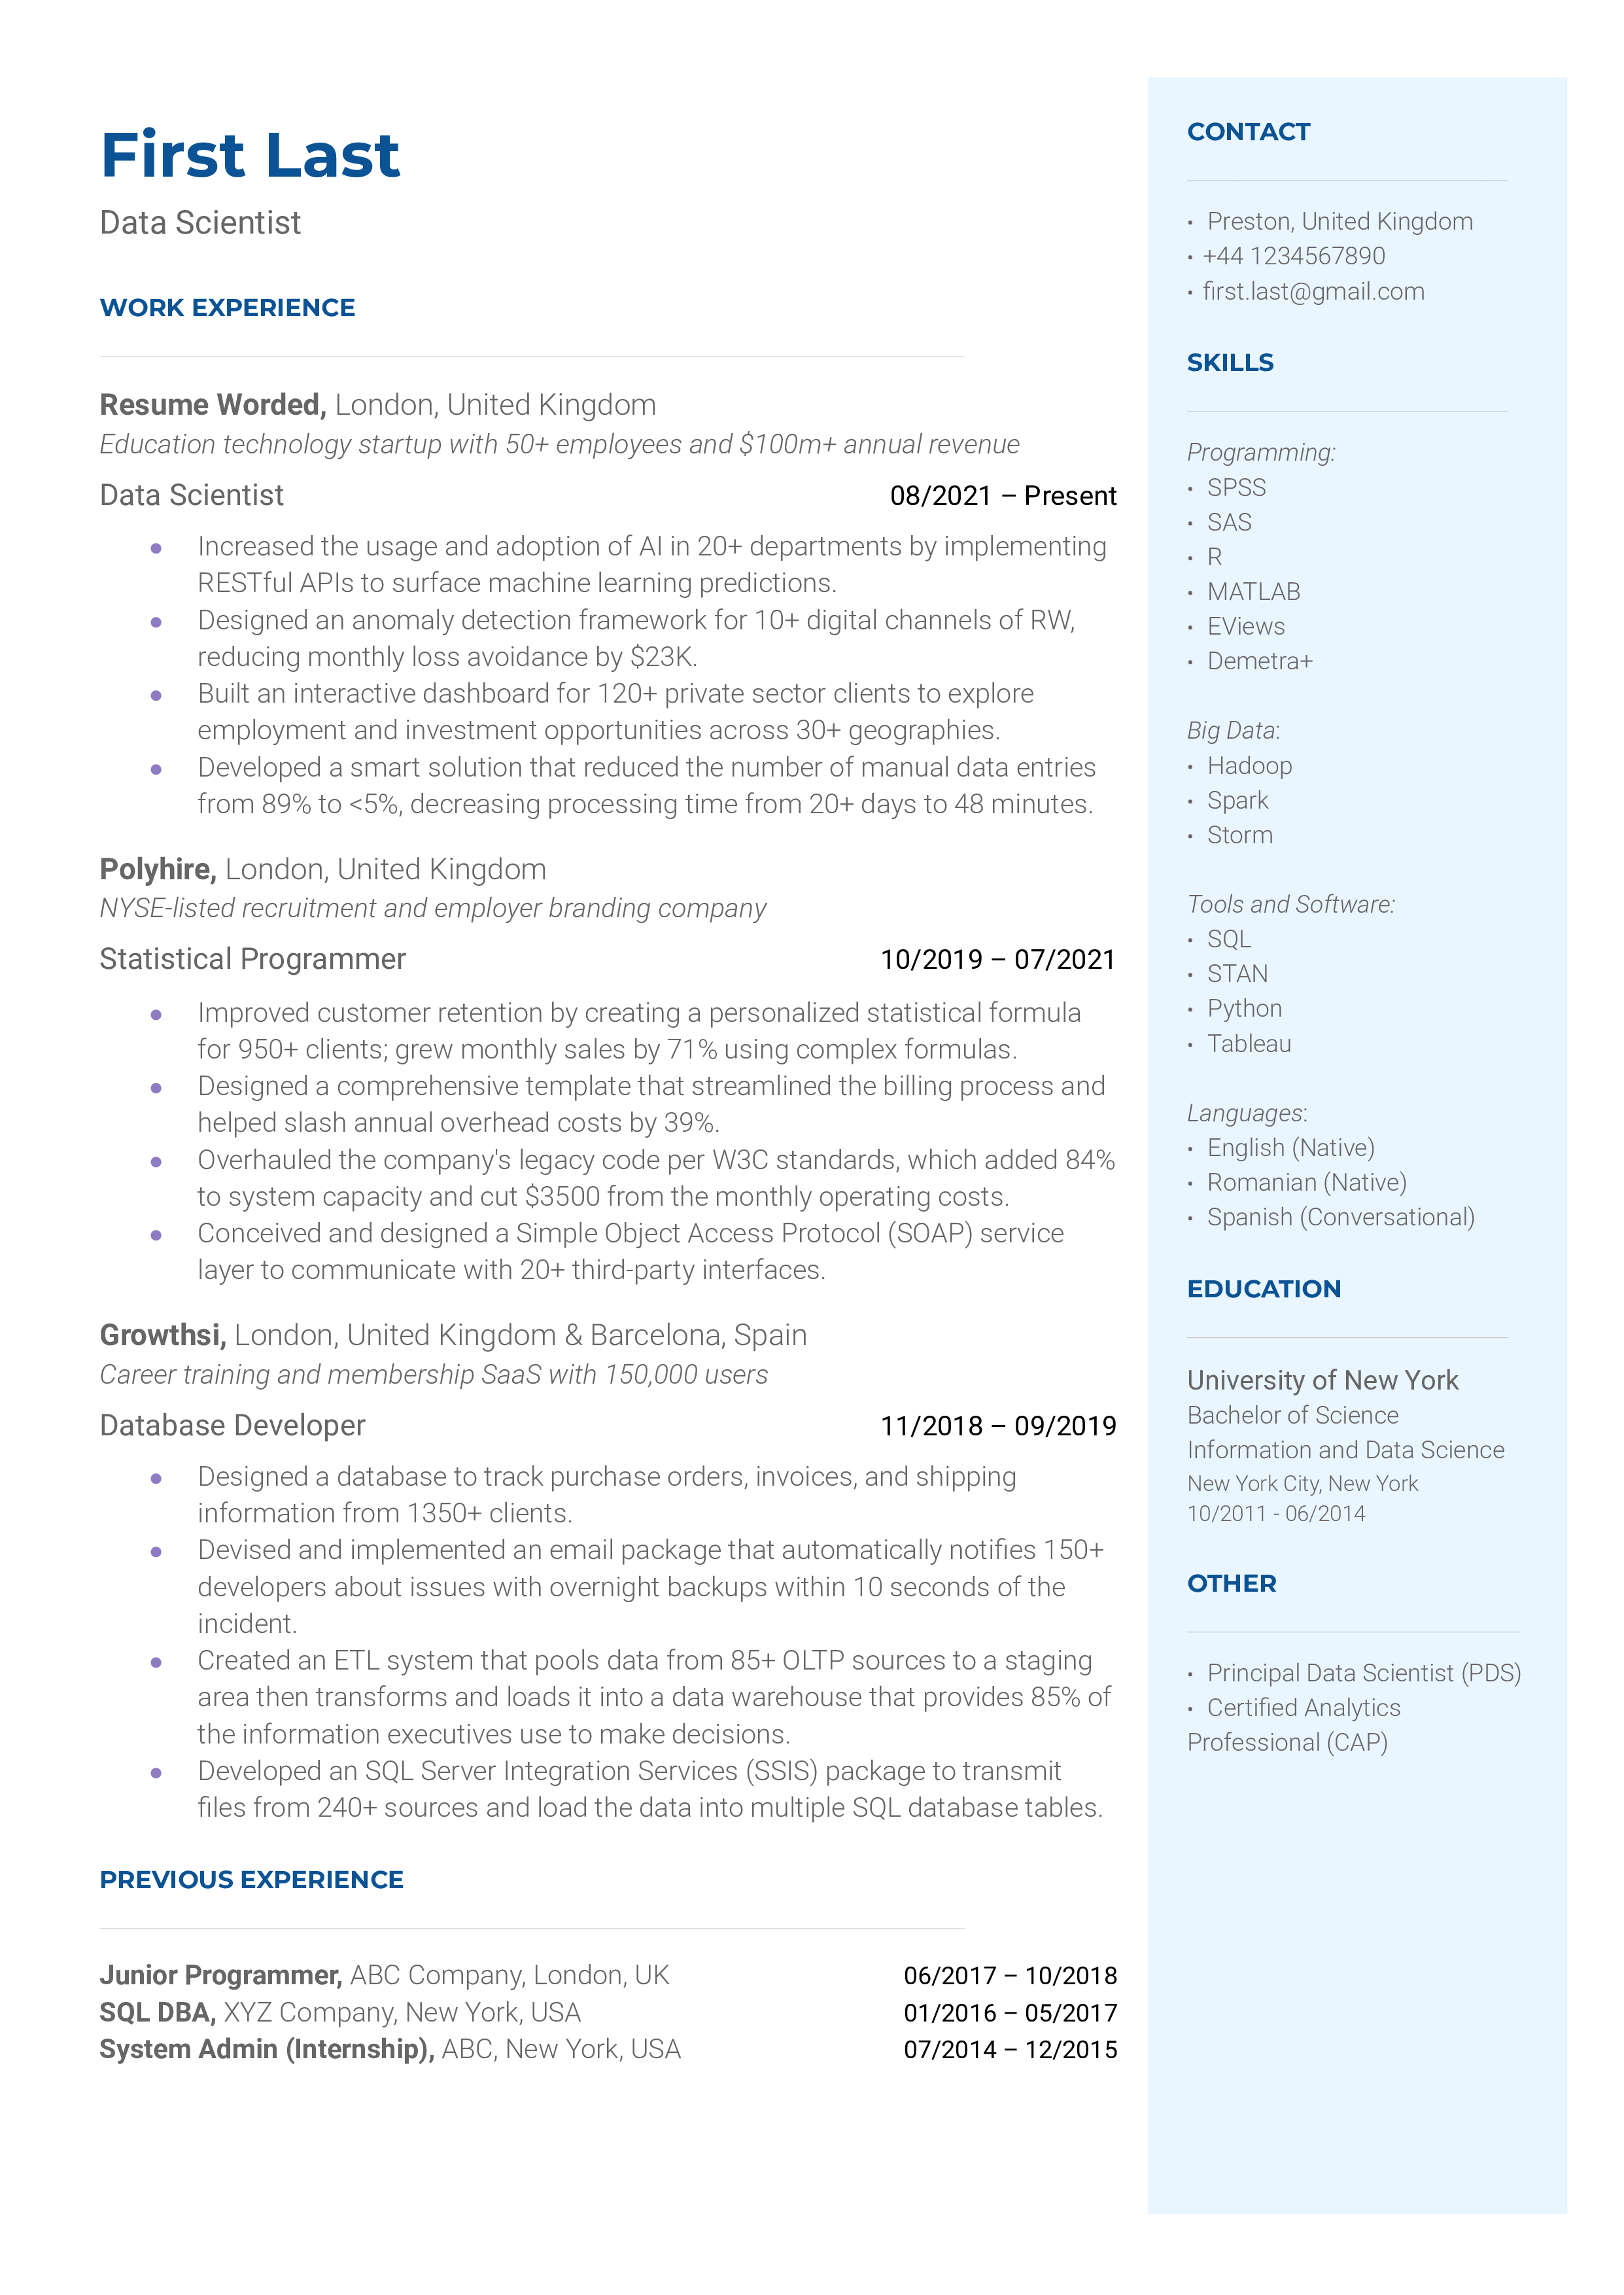 A data scientist resume template including big data and programming skills.